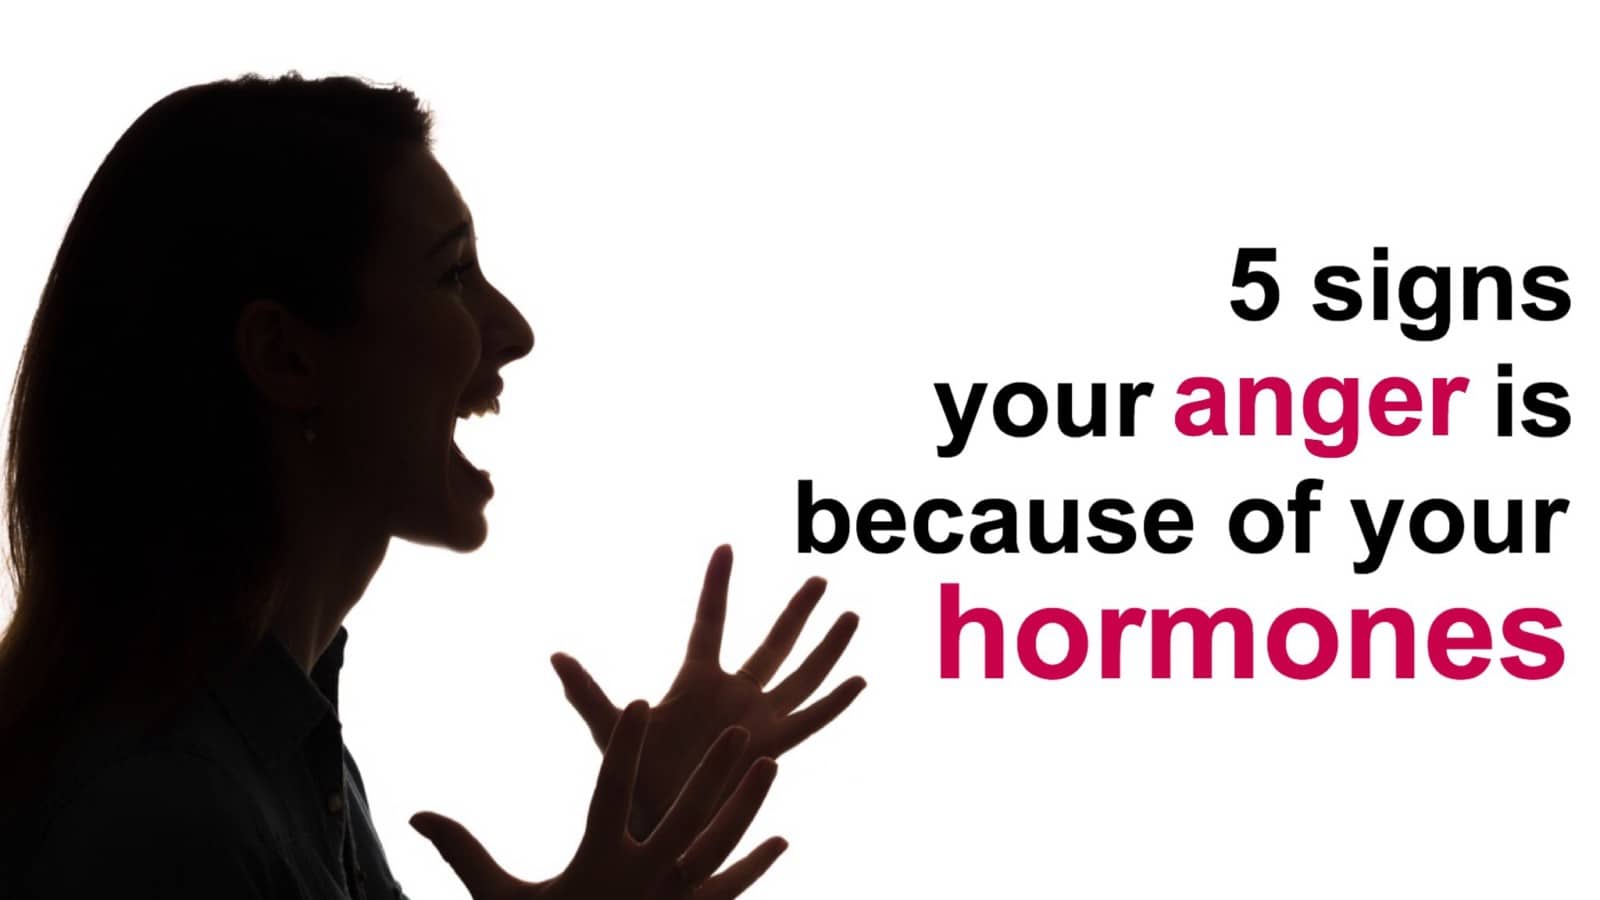 5 Signs Your Anger Is Because of Your Hormones